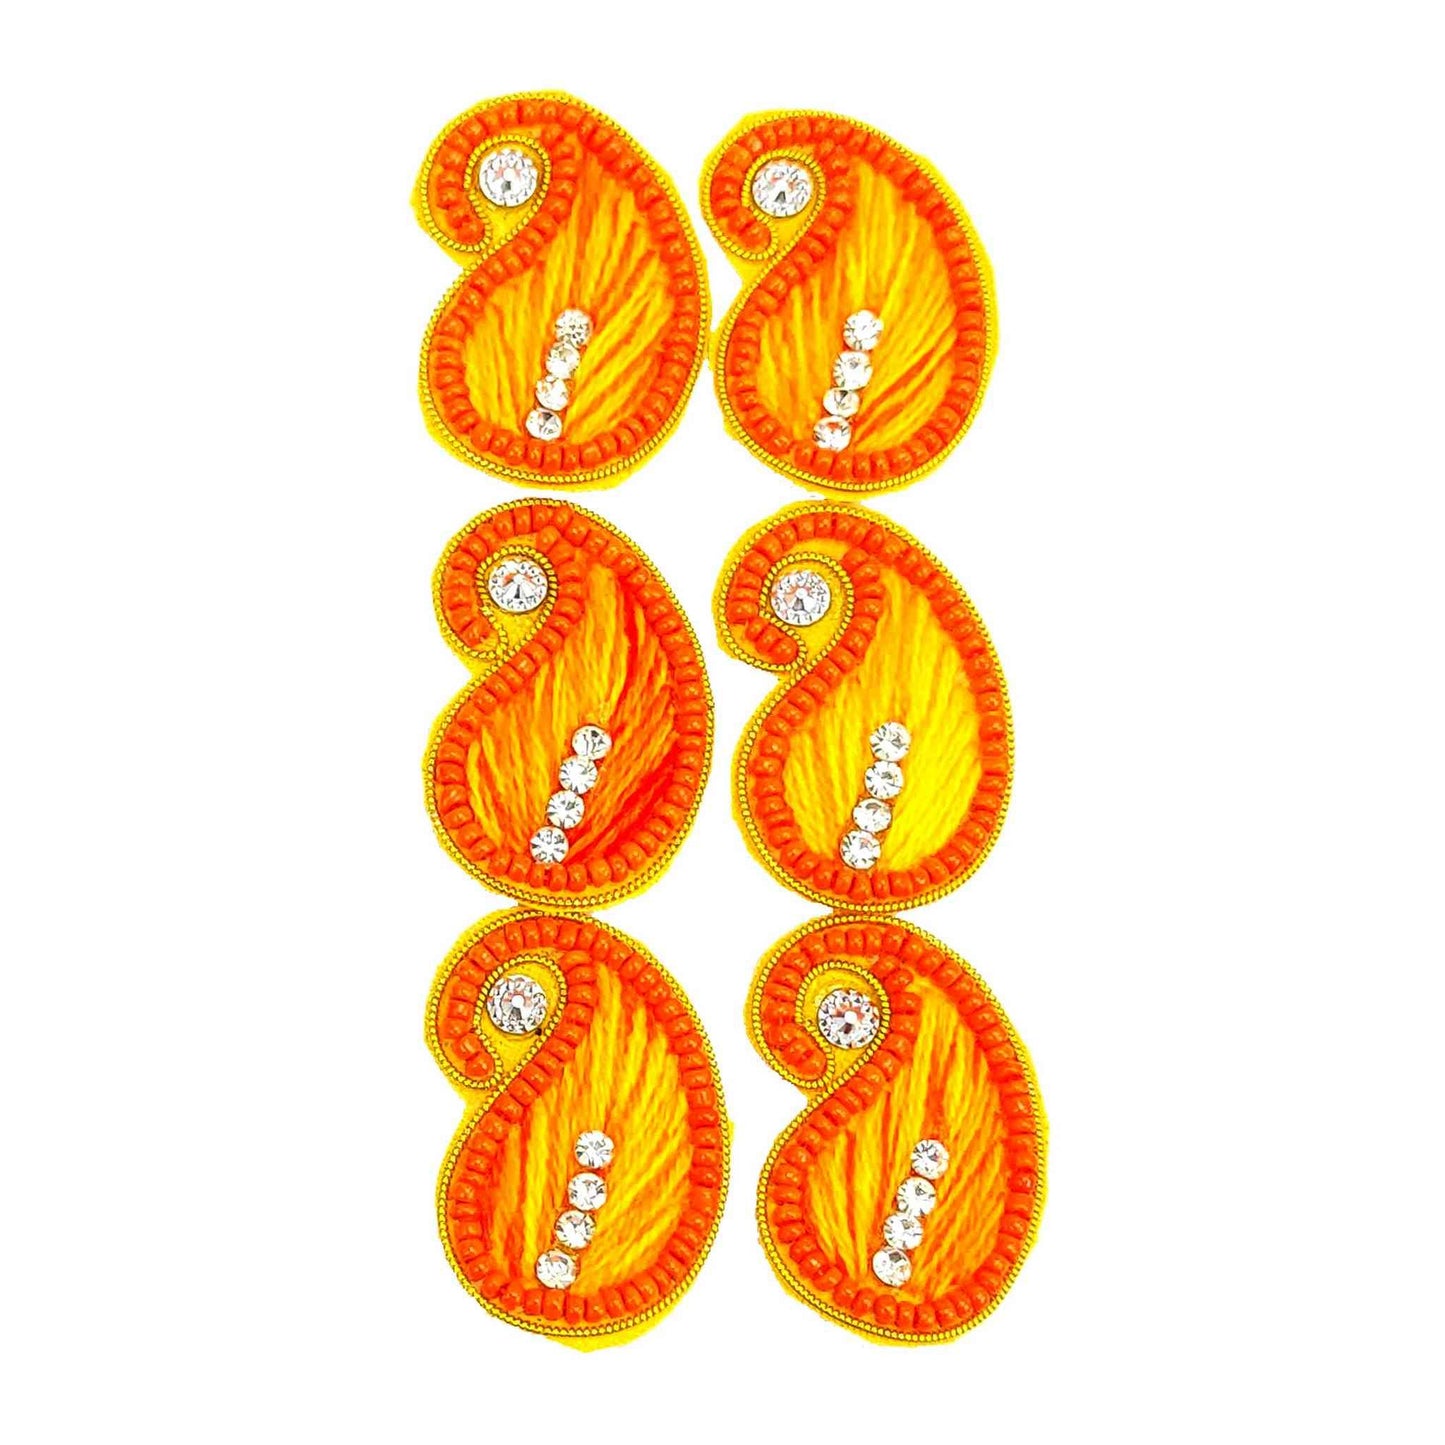 Indian Petals Traditional Tilak Style Thread Buti for DIY Craft, Trousseau Packing or Decoration (Bunch of 12) - Design 214, Orange - Indian Petals